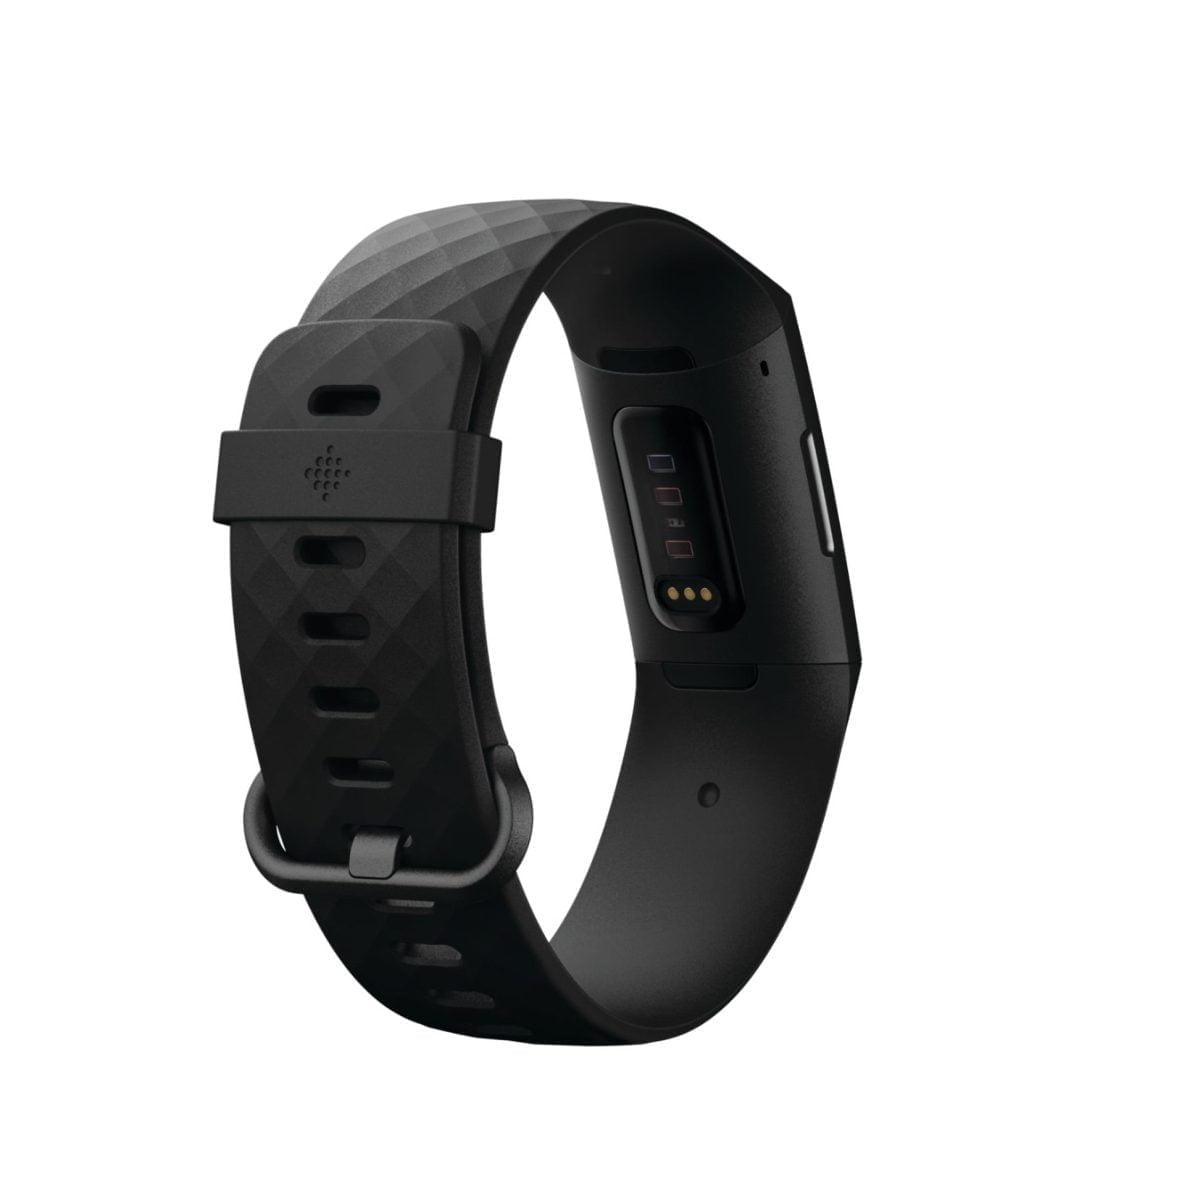 6405752 Bd Fitbit Keep Track Of Time And Listen To Your Favorite Tunes While Exercising With This Black Fitbit Charge 4 Activity Tracker. The Built-In Gps Tracks Your Outdoor Runs, Displaying The Distance Covered, While The Intuitive Touchscreen Delivers Vivid Visuals And Easy Operation. This Fitbit Charge 4 Activity Tracker Has A Rechargeable Battery That Offers Up To 7 Days Of Use, And The Swim-Proof Design Lets You Log Pool Workouts. &Lt;Ul&Gt; &Lt;Li&Gt;Measures Calories Burned And Heart Rate&Lt;/Li&Gt; &Lt;Li&Gt;Comprehensive Monitoring&Lt;/Li&Gt; &Lt;Li&Gt;Sleep Tracking&Lt;/Li&Gt; &Lt;Li&Gt;Backlit Led Display&Lt;/Li&Gt; &Lt;Li&Gt;Fitbit Pay&Lt;/Li&Gt; &Lt;Li&Gt;Active Zone Minutes&Lt;/Li&Gt; &Lt;Li&Gt;Built-In Gps&Lt;/Li&Gt; &Lt;Li&Gt;Water-Resistant Design&Lt;/Li&Gt; &Lt;Li&Gt;Syncs To Select Apple® And Android Devices&Lt;/Li&Gt; &Lt;Li&Gt;Rechargeable Battery&Lt;/Li&Gt; &Lt;/Ul&Gt; Fitbit - Charge 4 Activity Tracker Gps + Heart Rate - Black